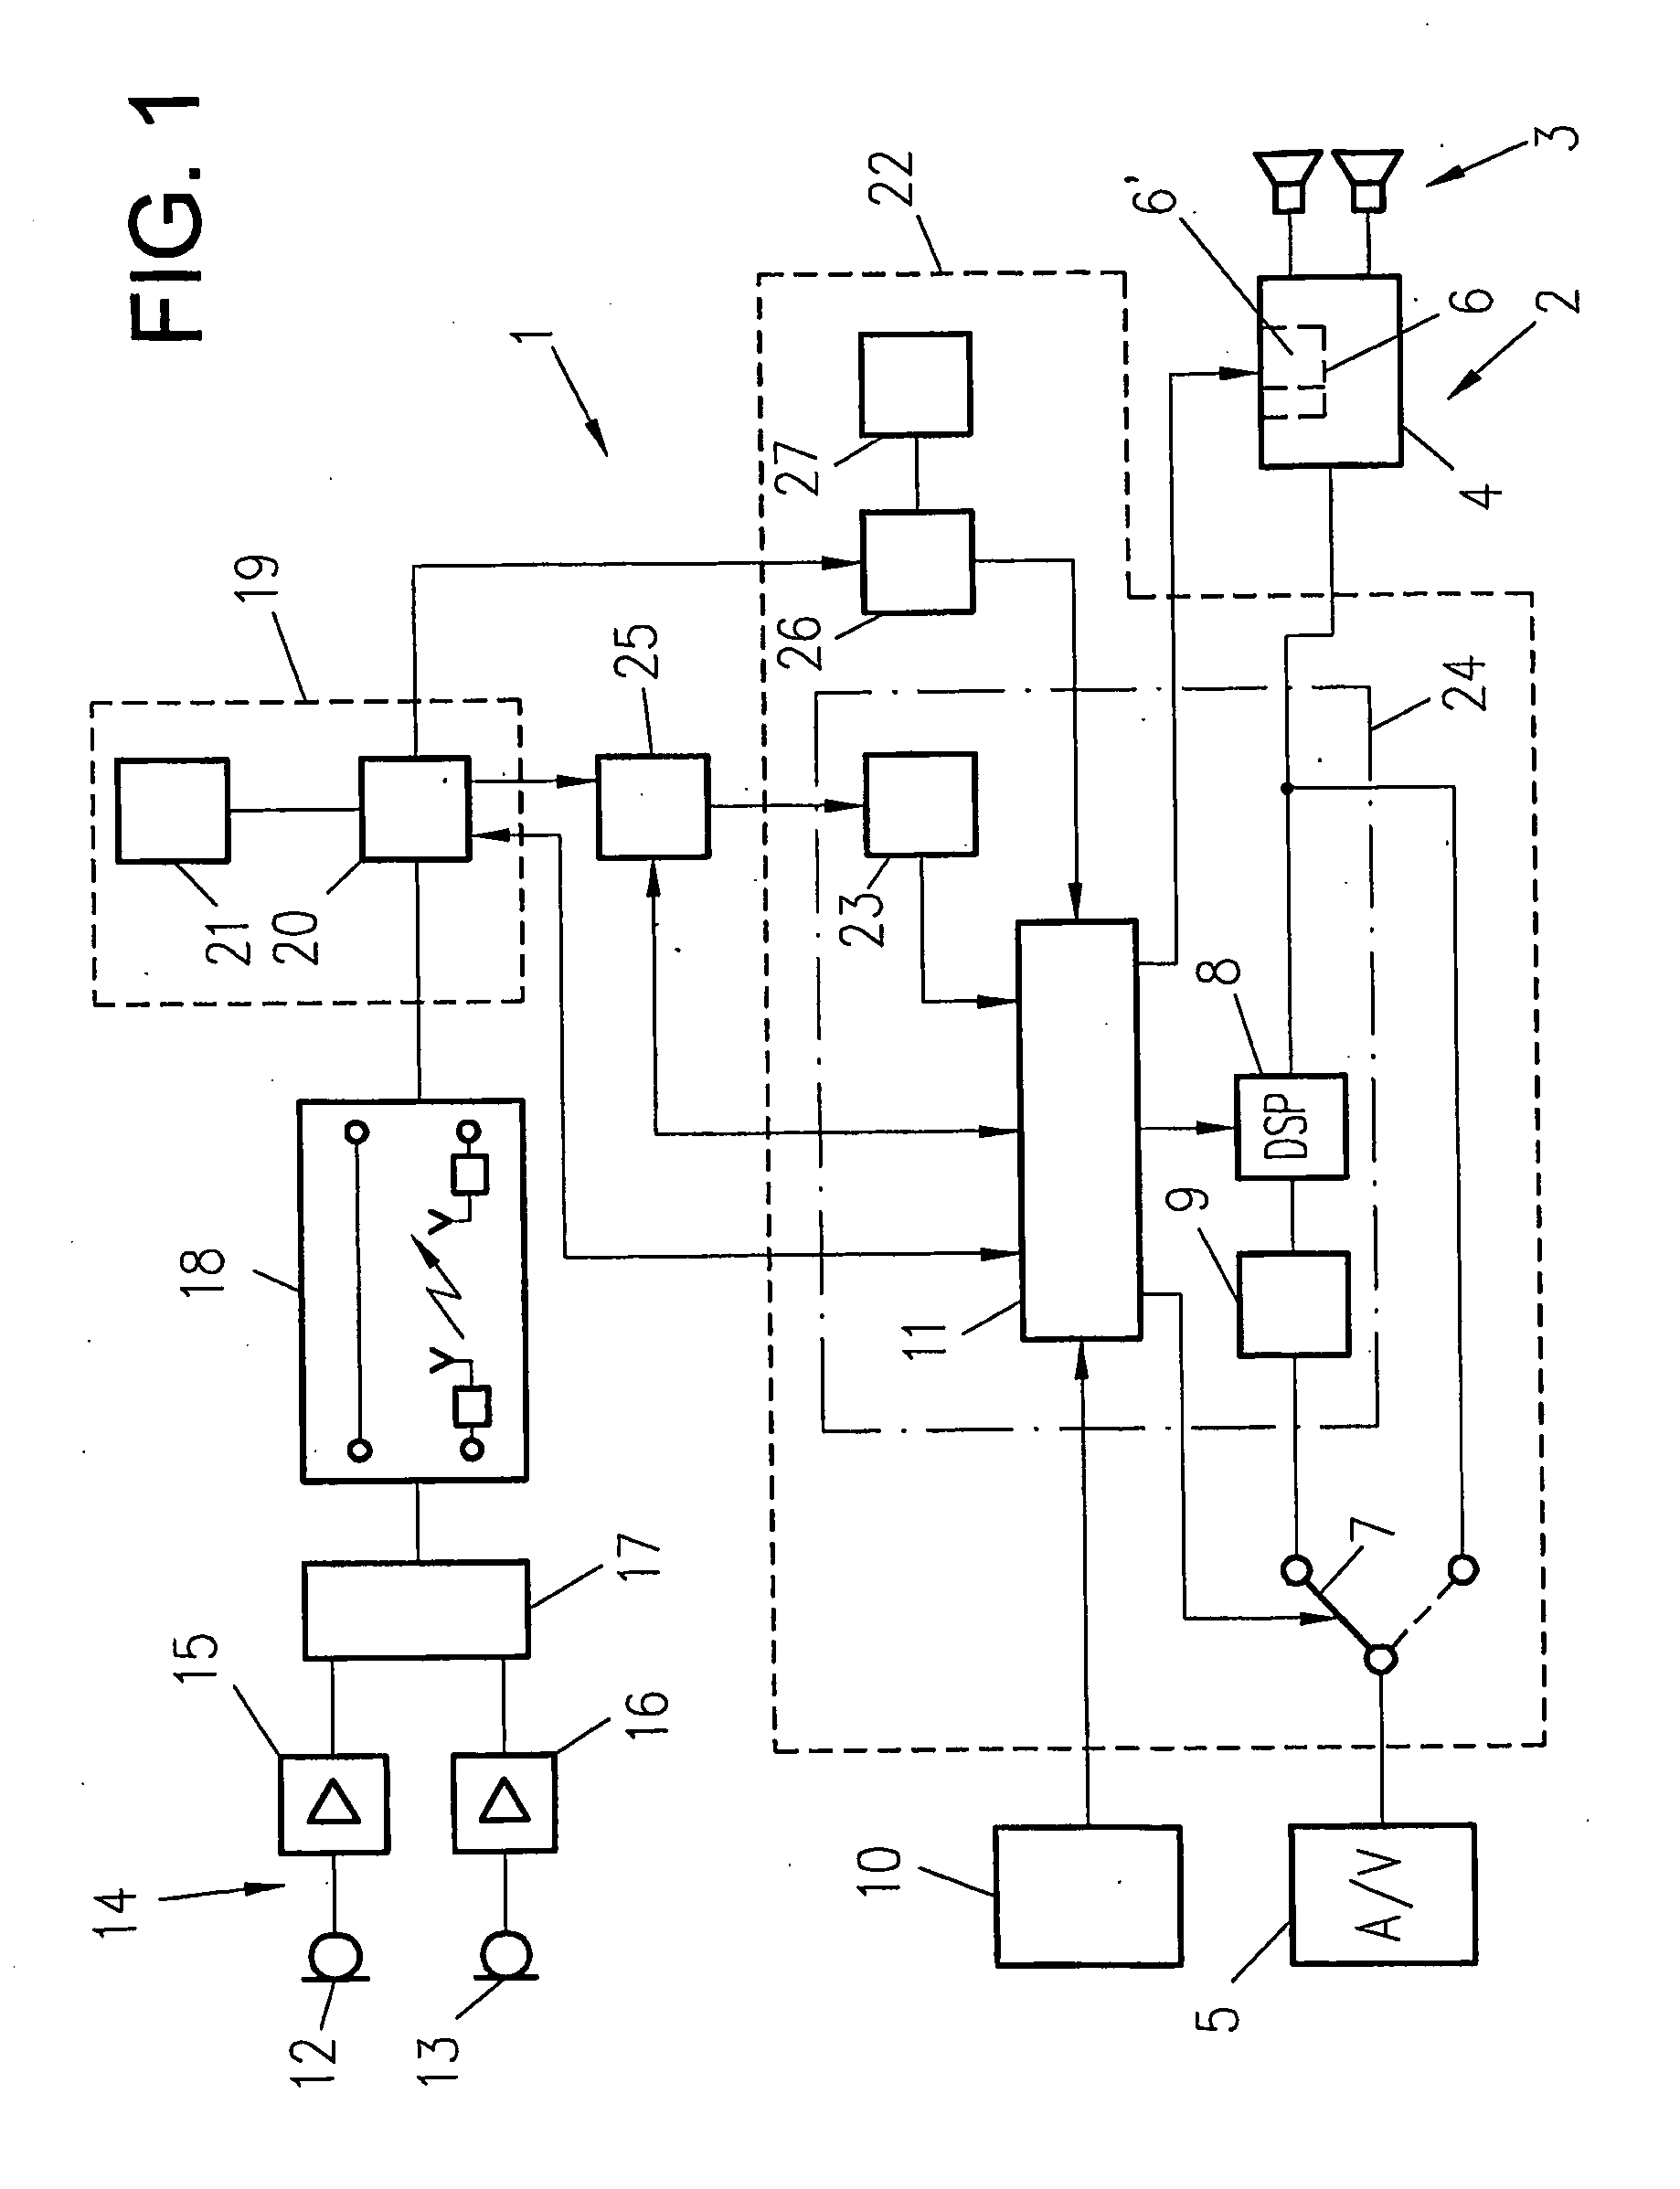 System for and method of controlling playback of audio signals